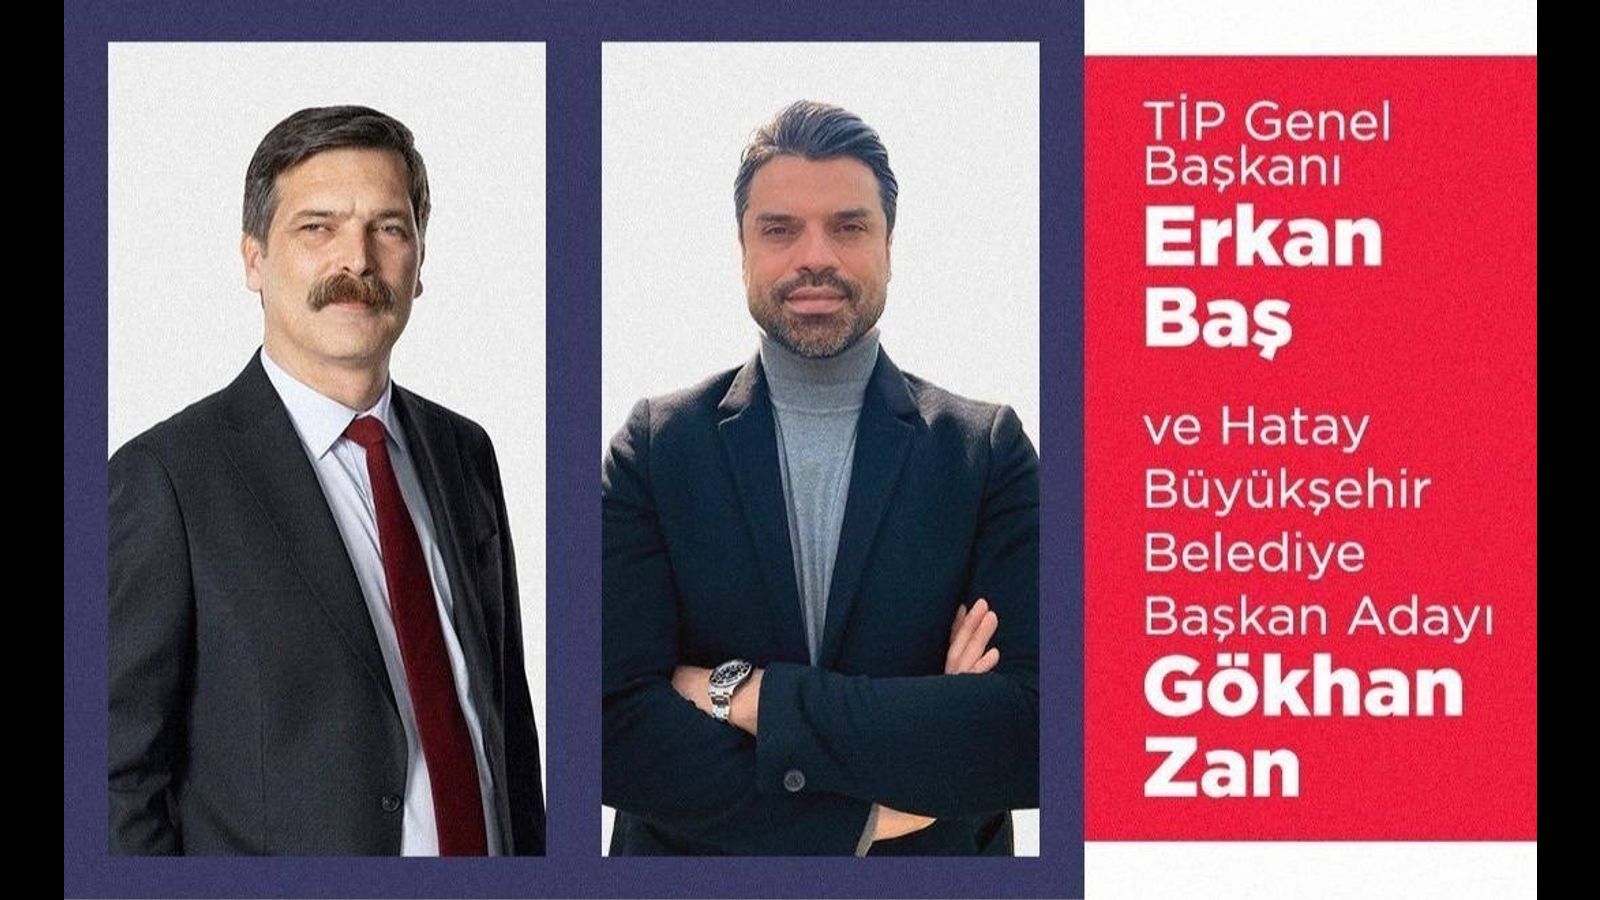 Turkey: the crisis of TP Hatay's candidacy underlines the bankruptcy of the pseudo-left orientation towards the bourgeoisie